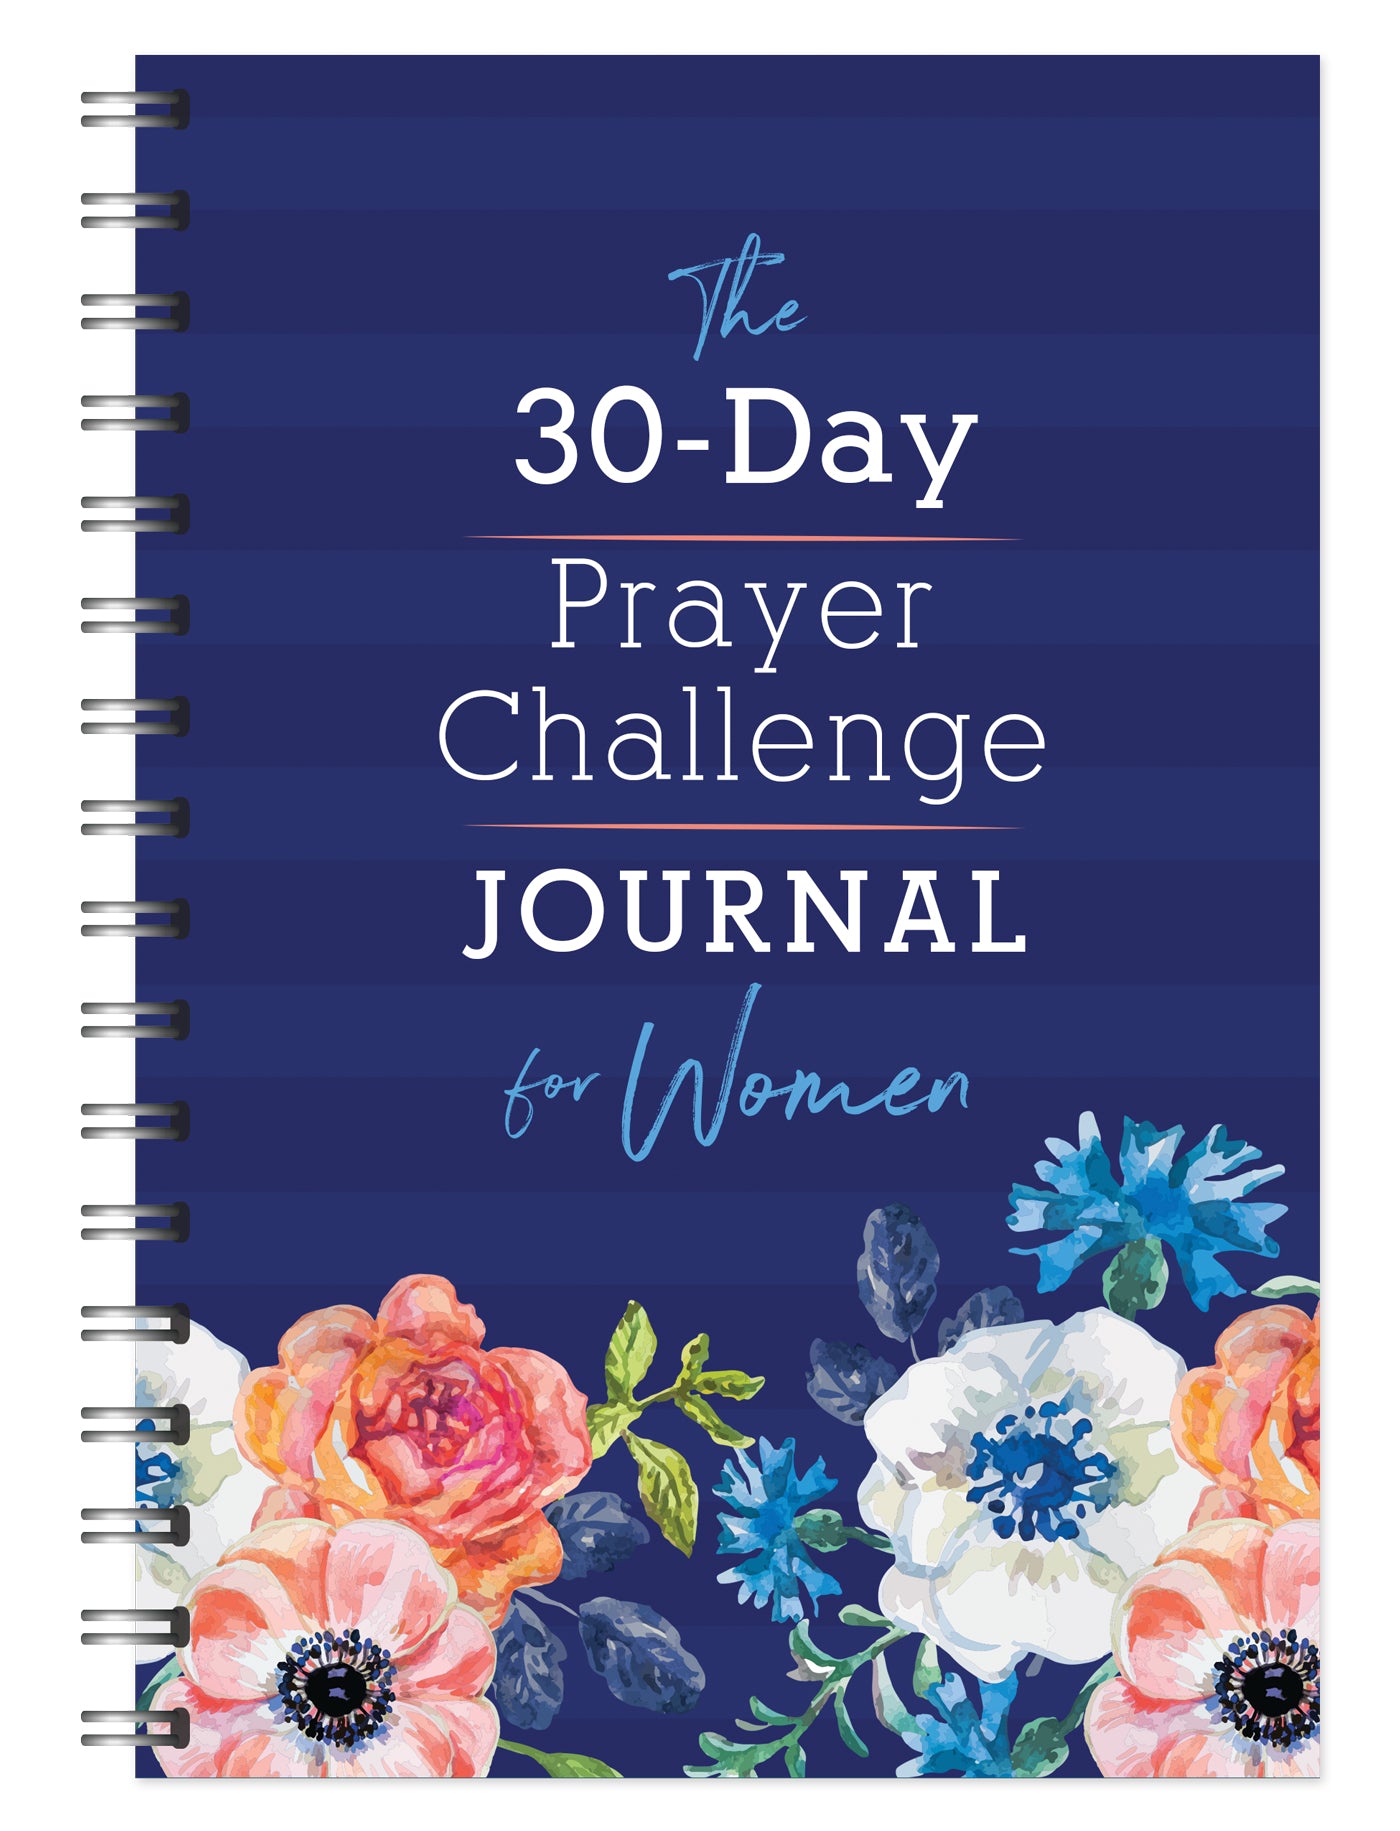 Image of 30-Day Prayer Challenge Journal for Women other